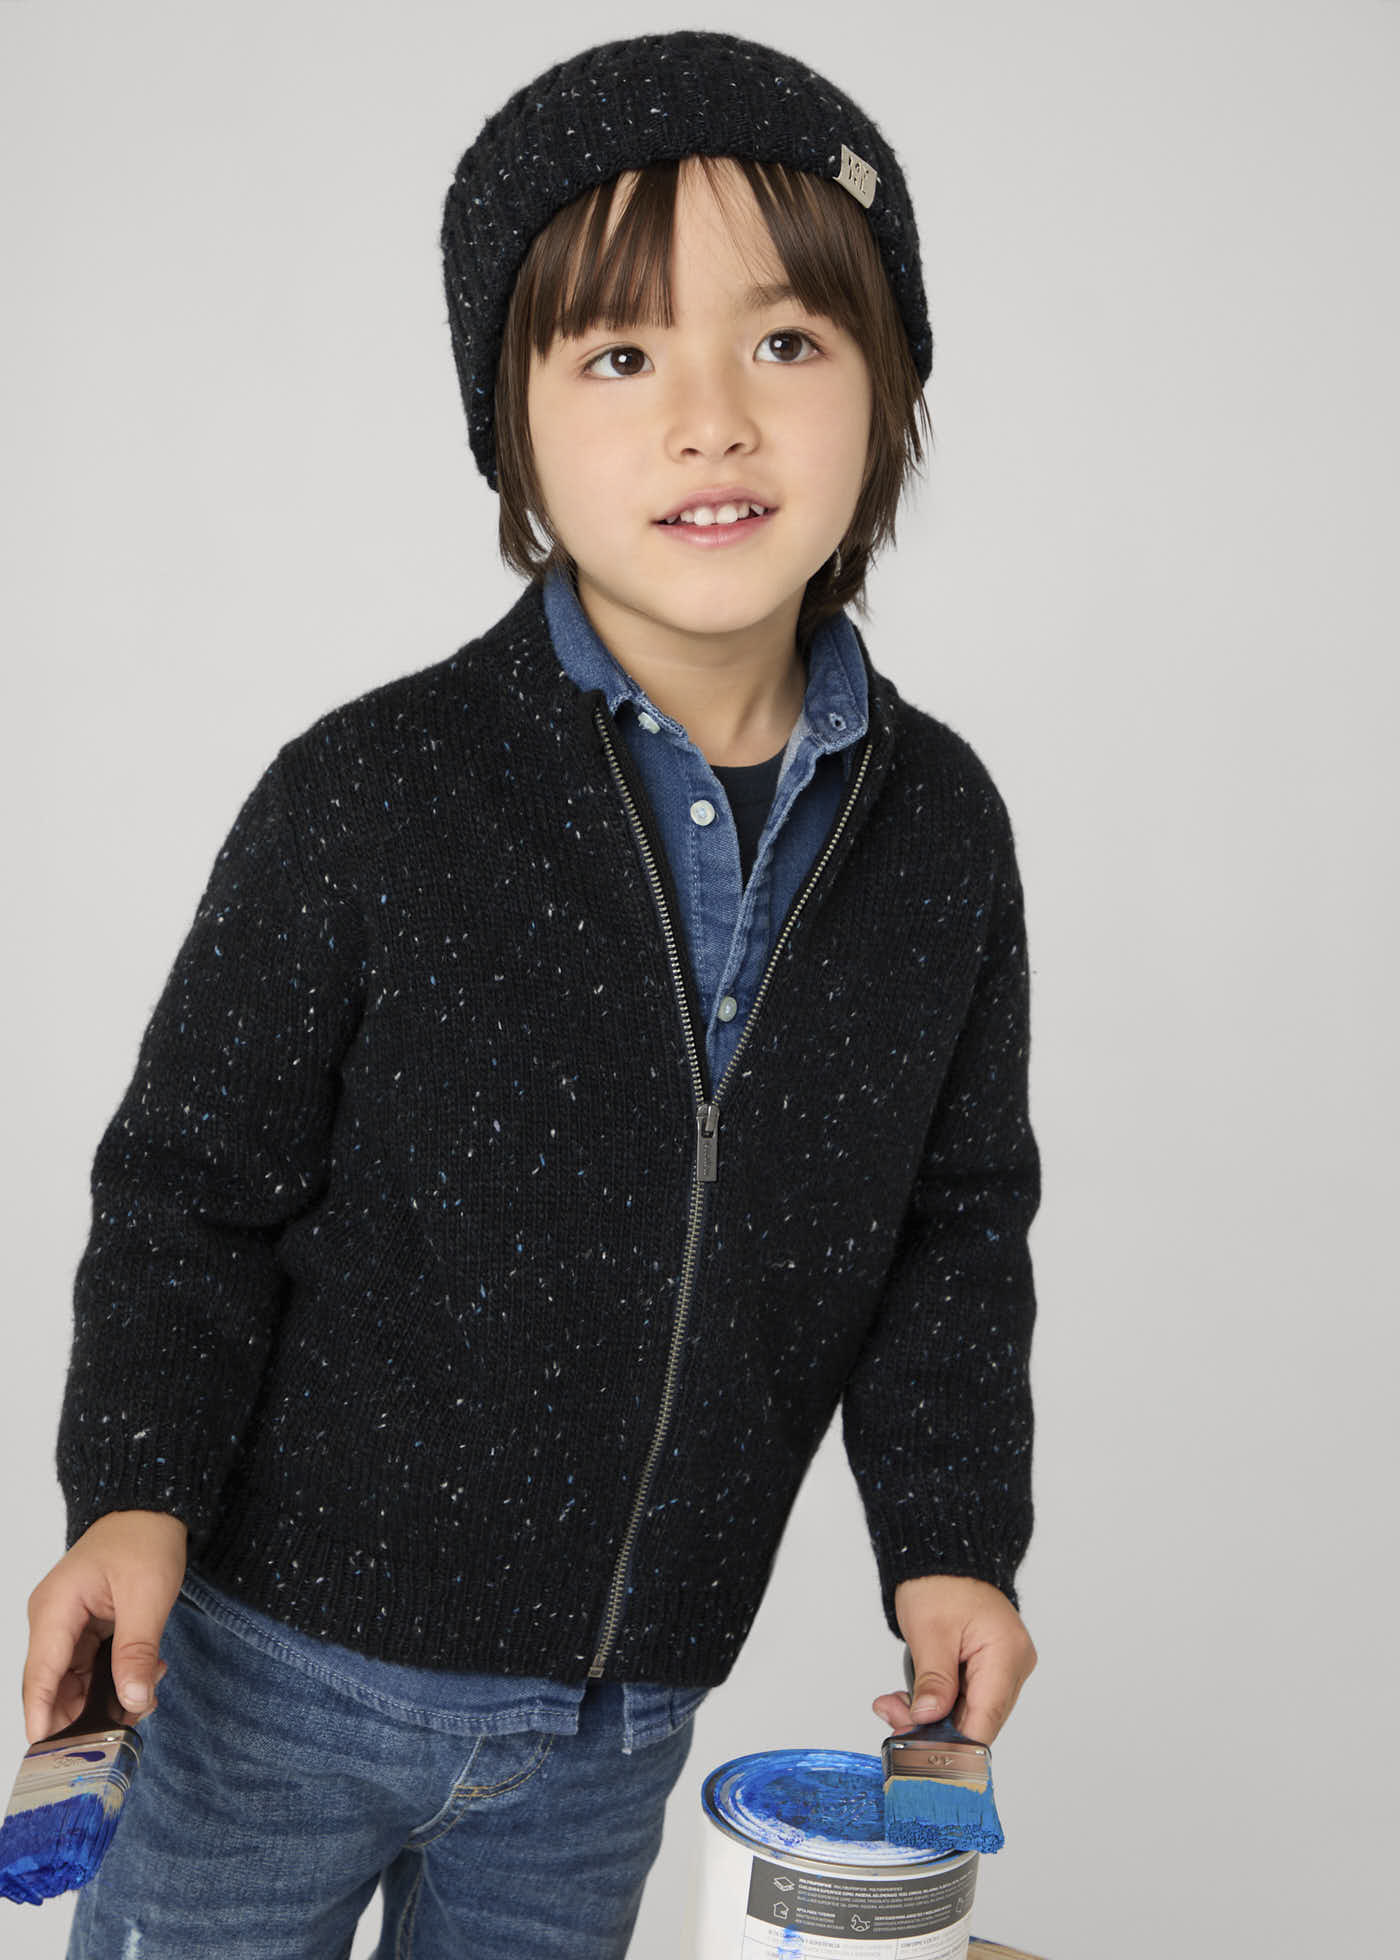 Colored speckled cardigan boys